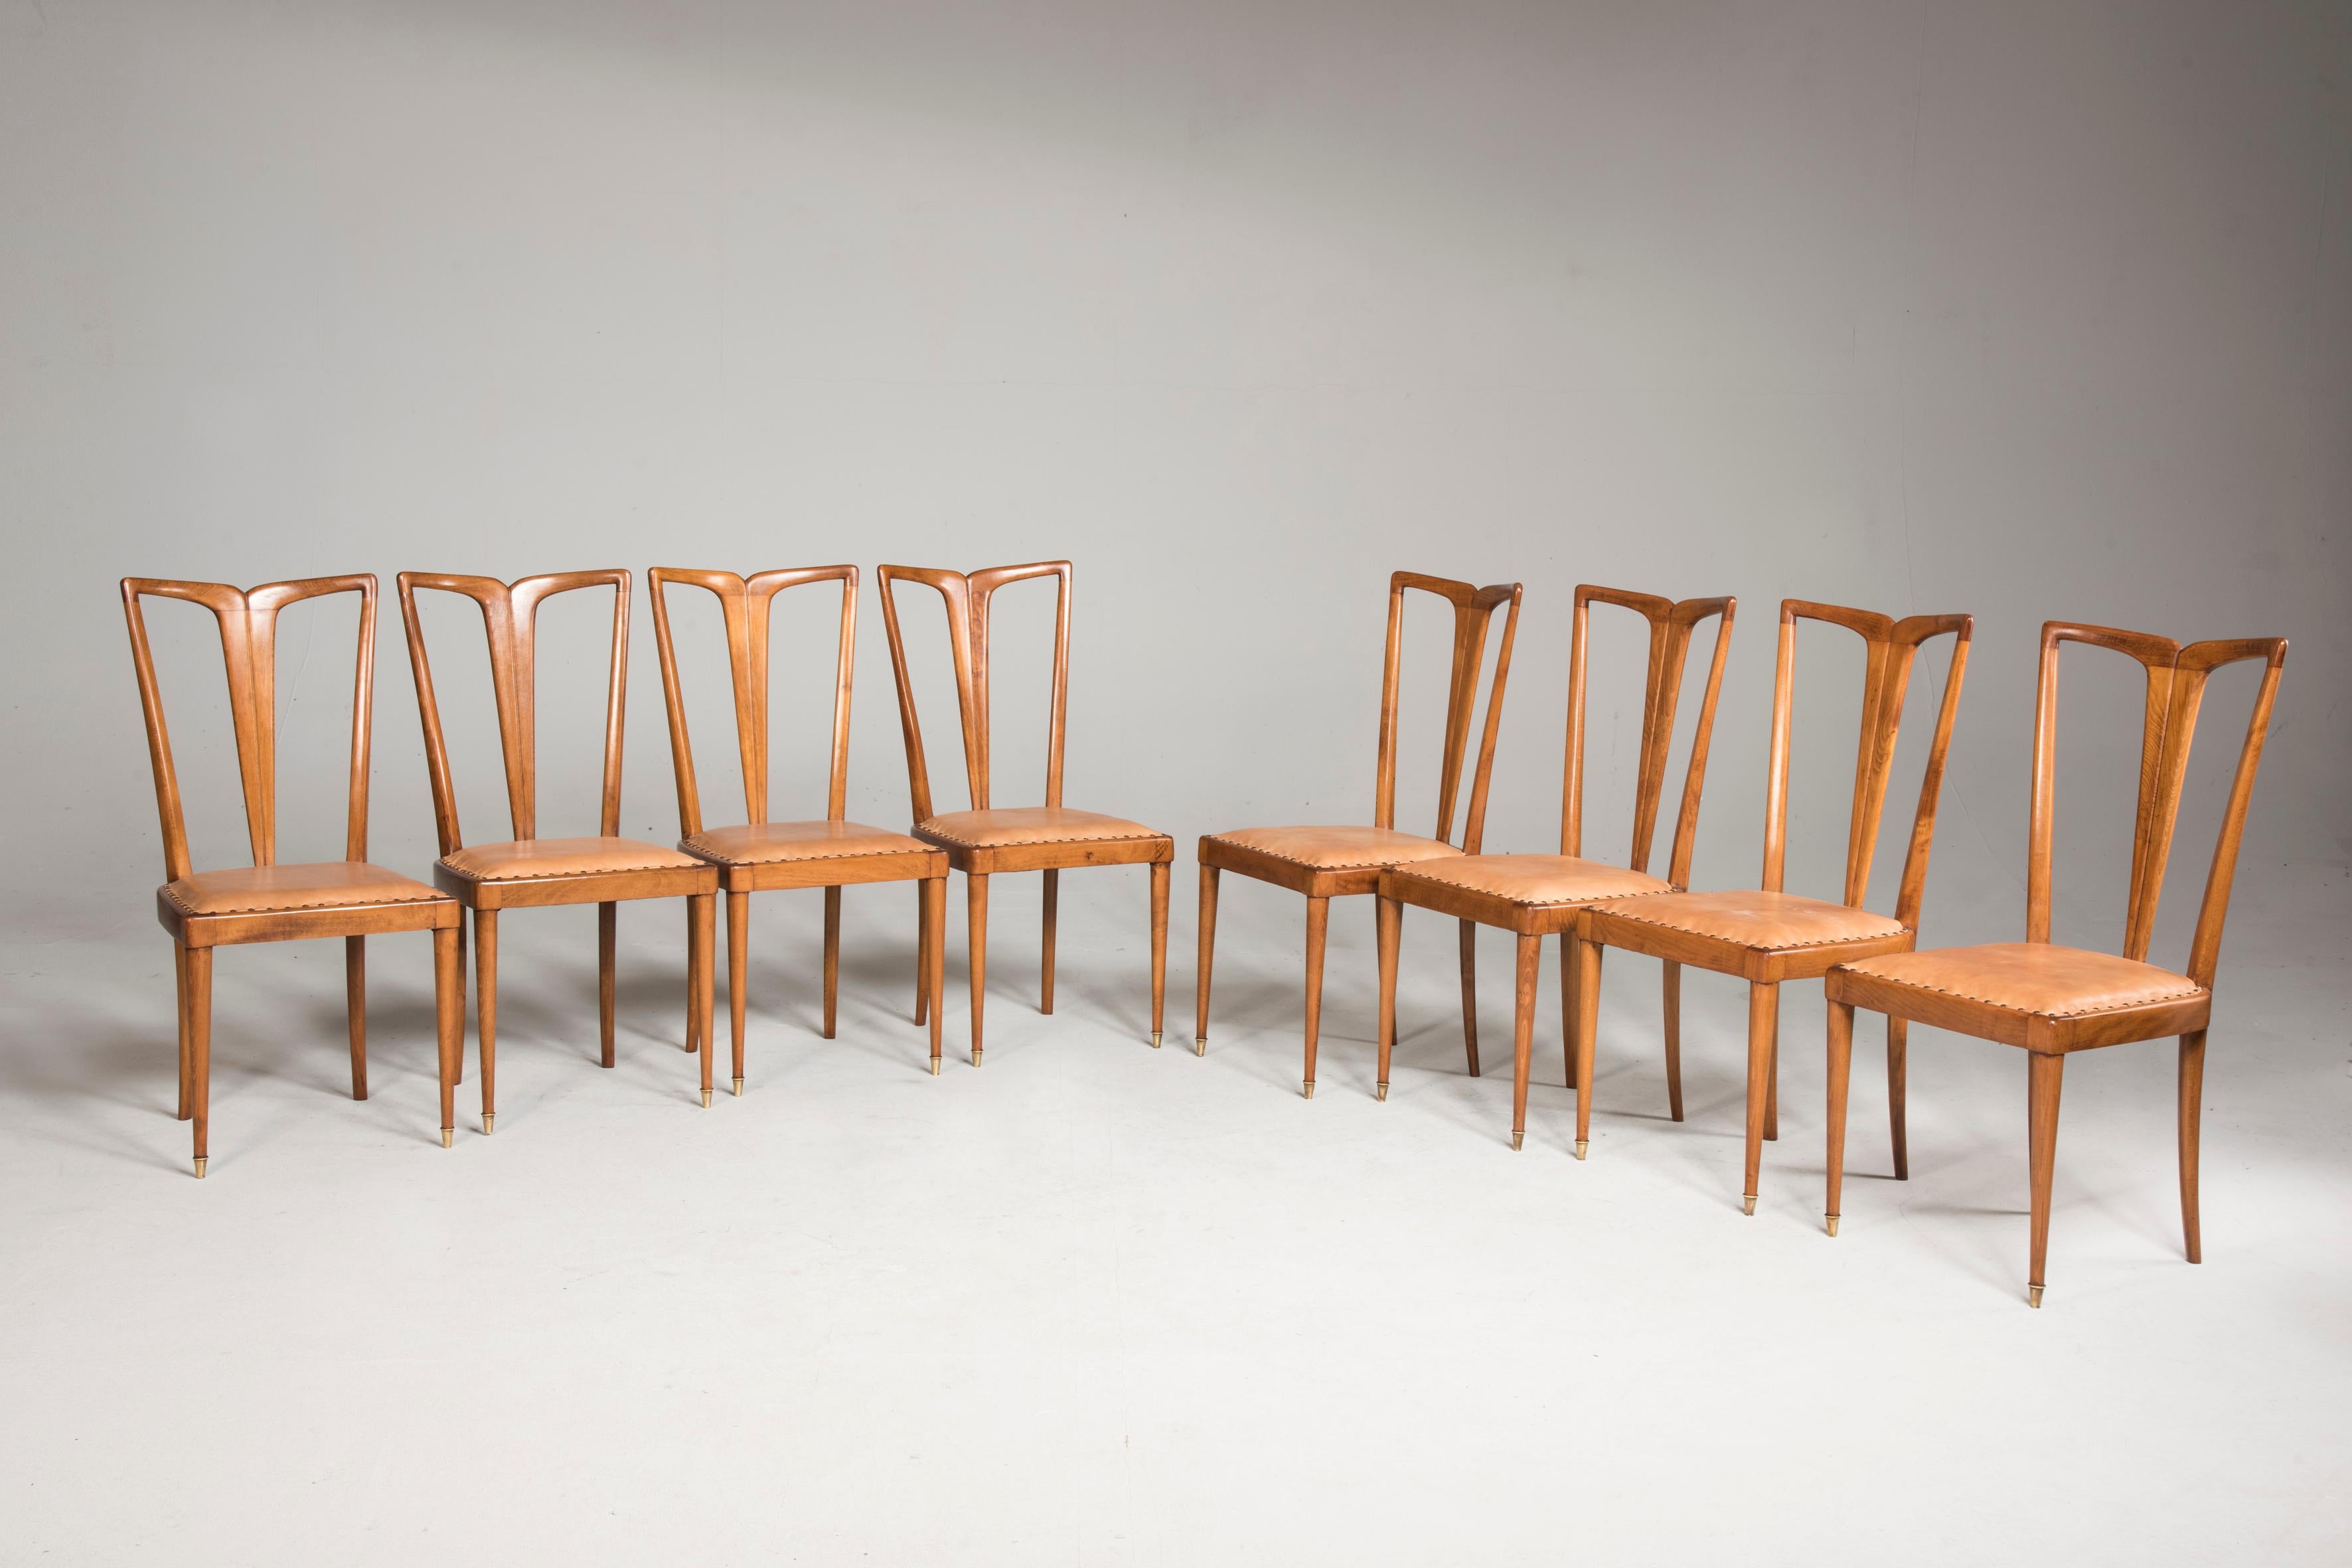 1950 Guglielmo Ulrich Wood and light brown Leather Dining Chairs, set of eight
These mid century chairs, designed by the famous Italian architect and designer G. Ulrich, come with new light brown leather upholstery.
They have been restored in the